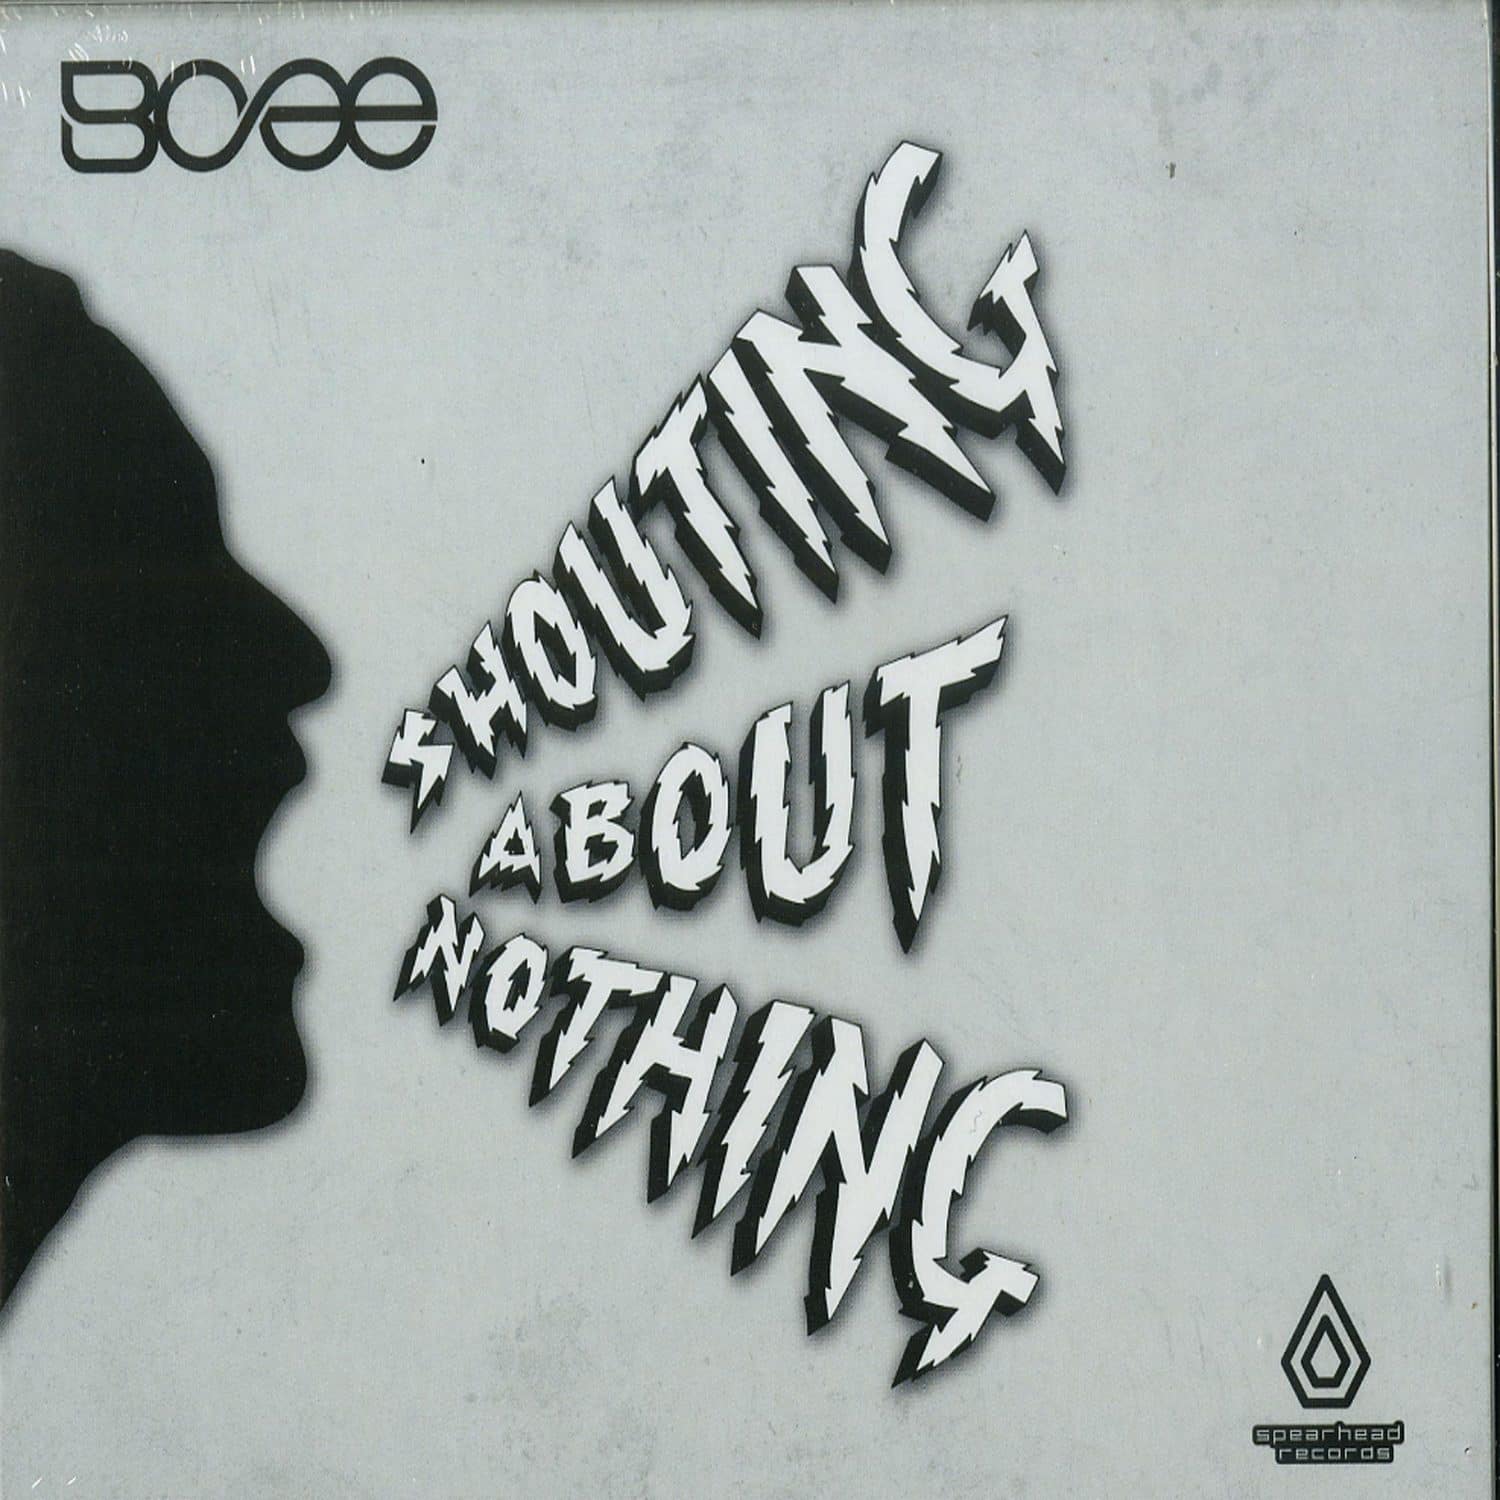 BCee - SHOUTING ABOUT NOTHING 